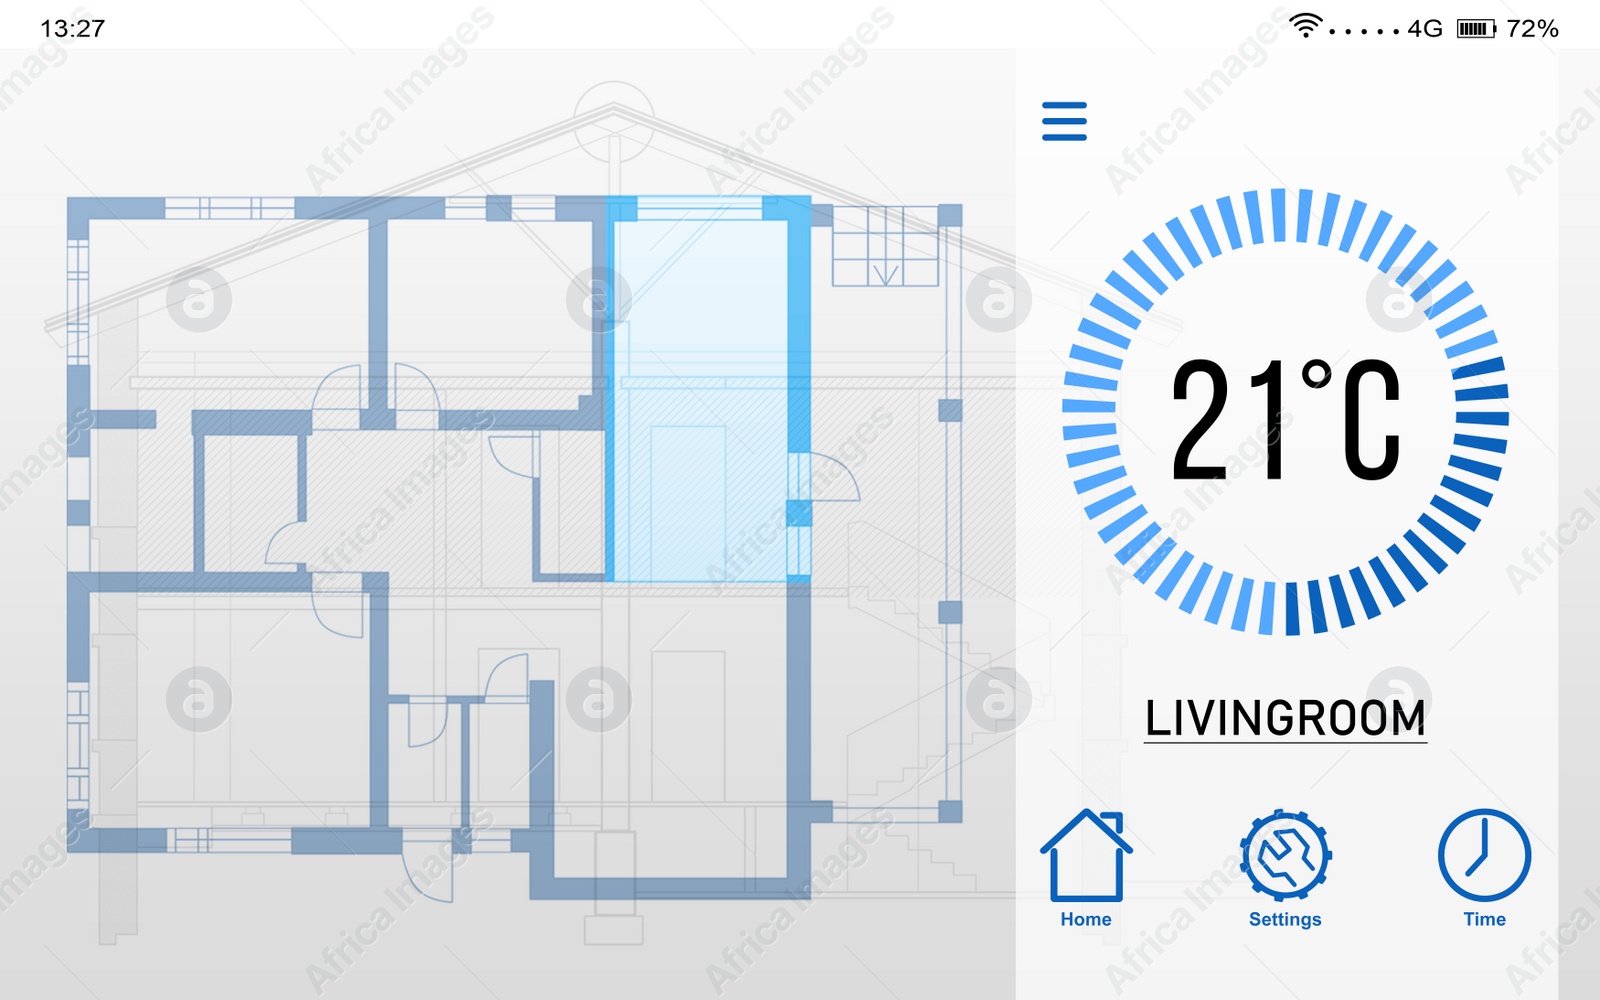 Illustration of Heating control system. Application displaying temperature and house plan